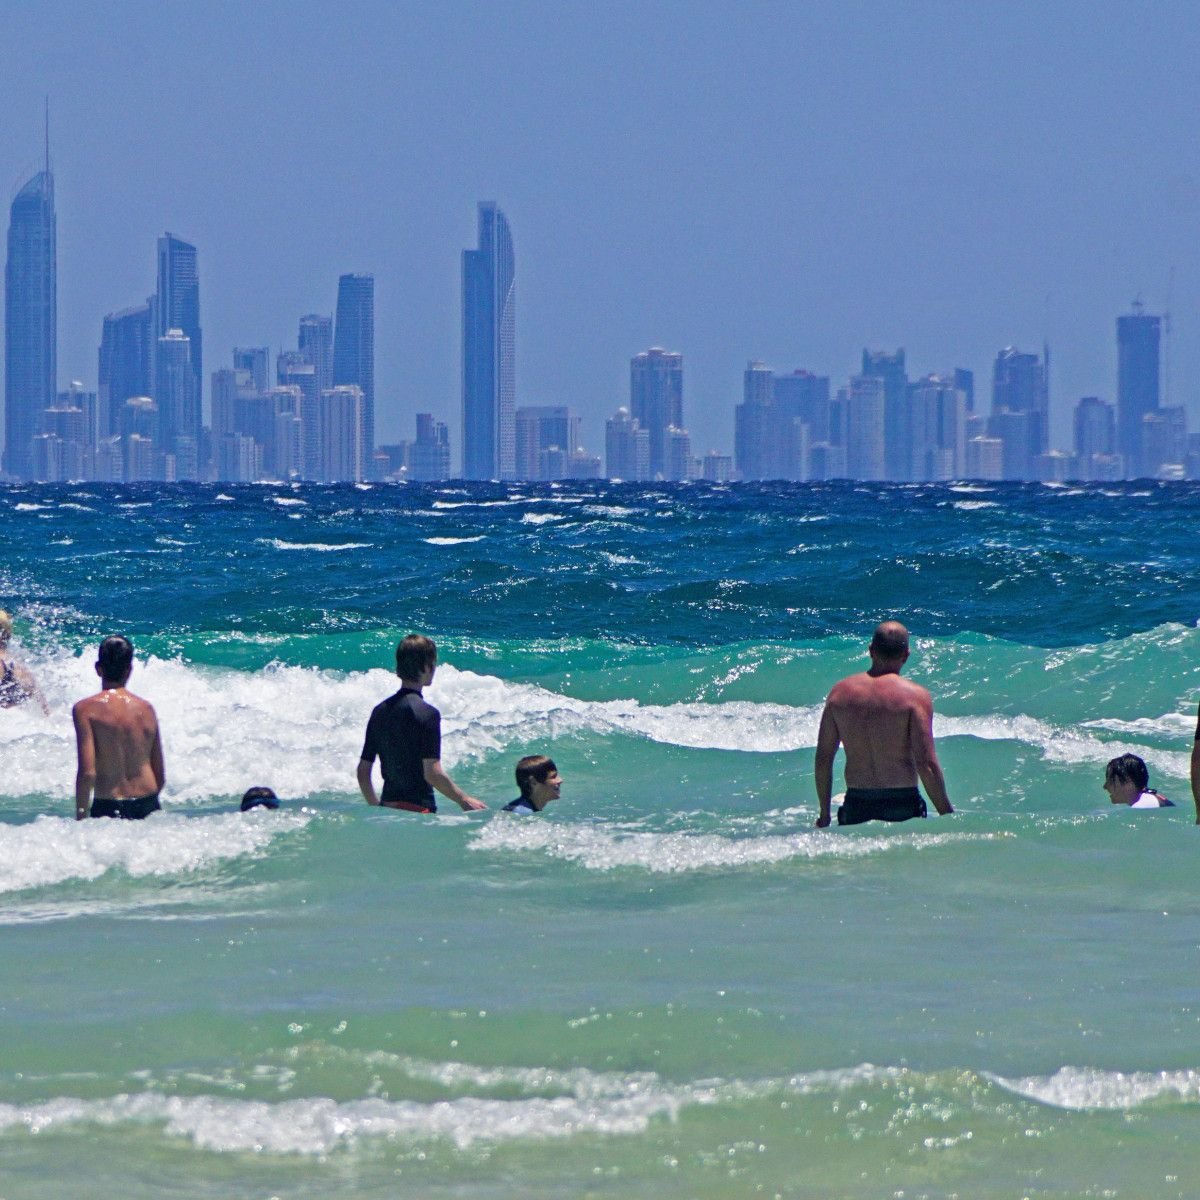 25 Things to do in Surfers Paradise Queensland - Quack'rDuck